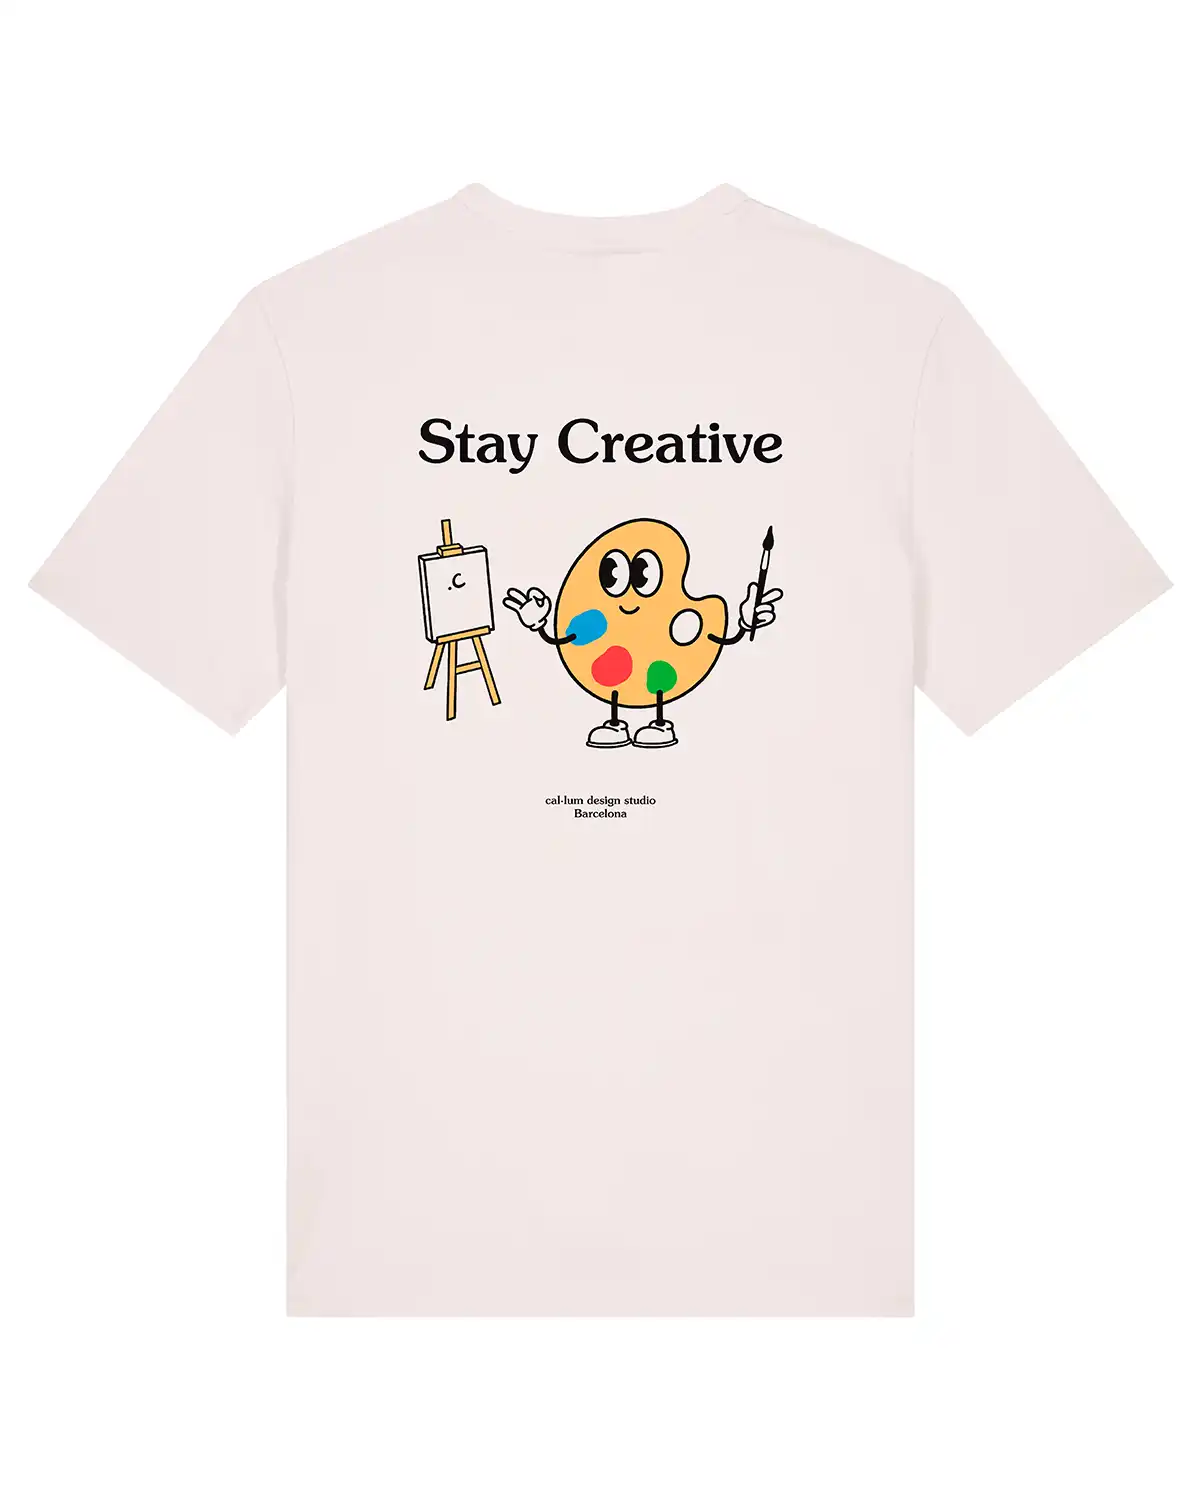 White t-shirt with stay creative illustration print from the back